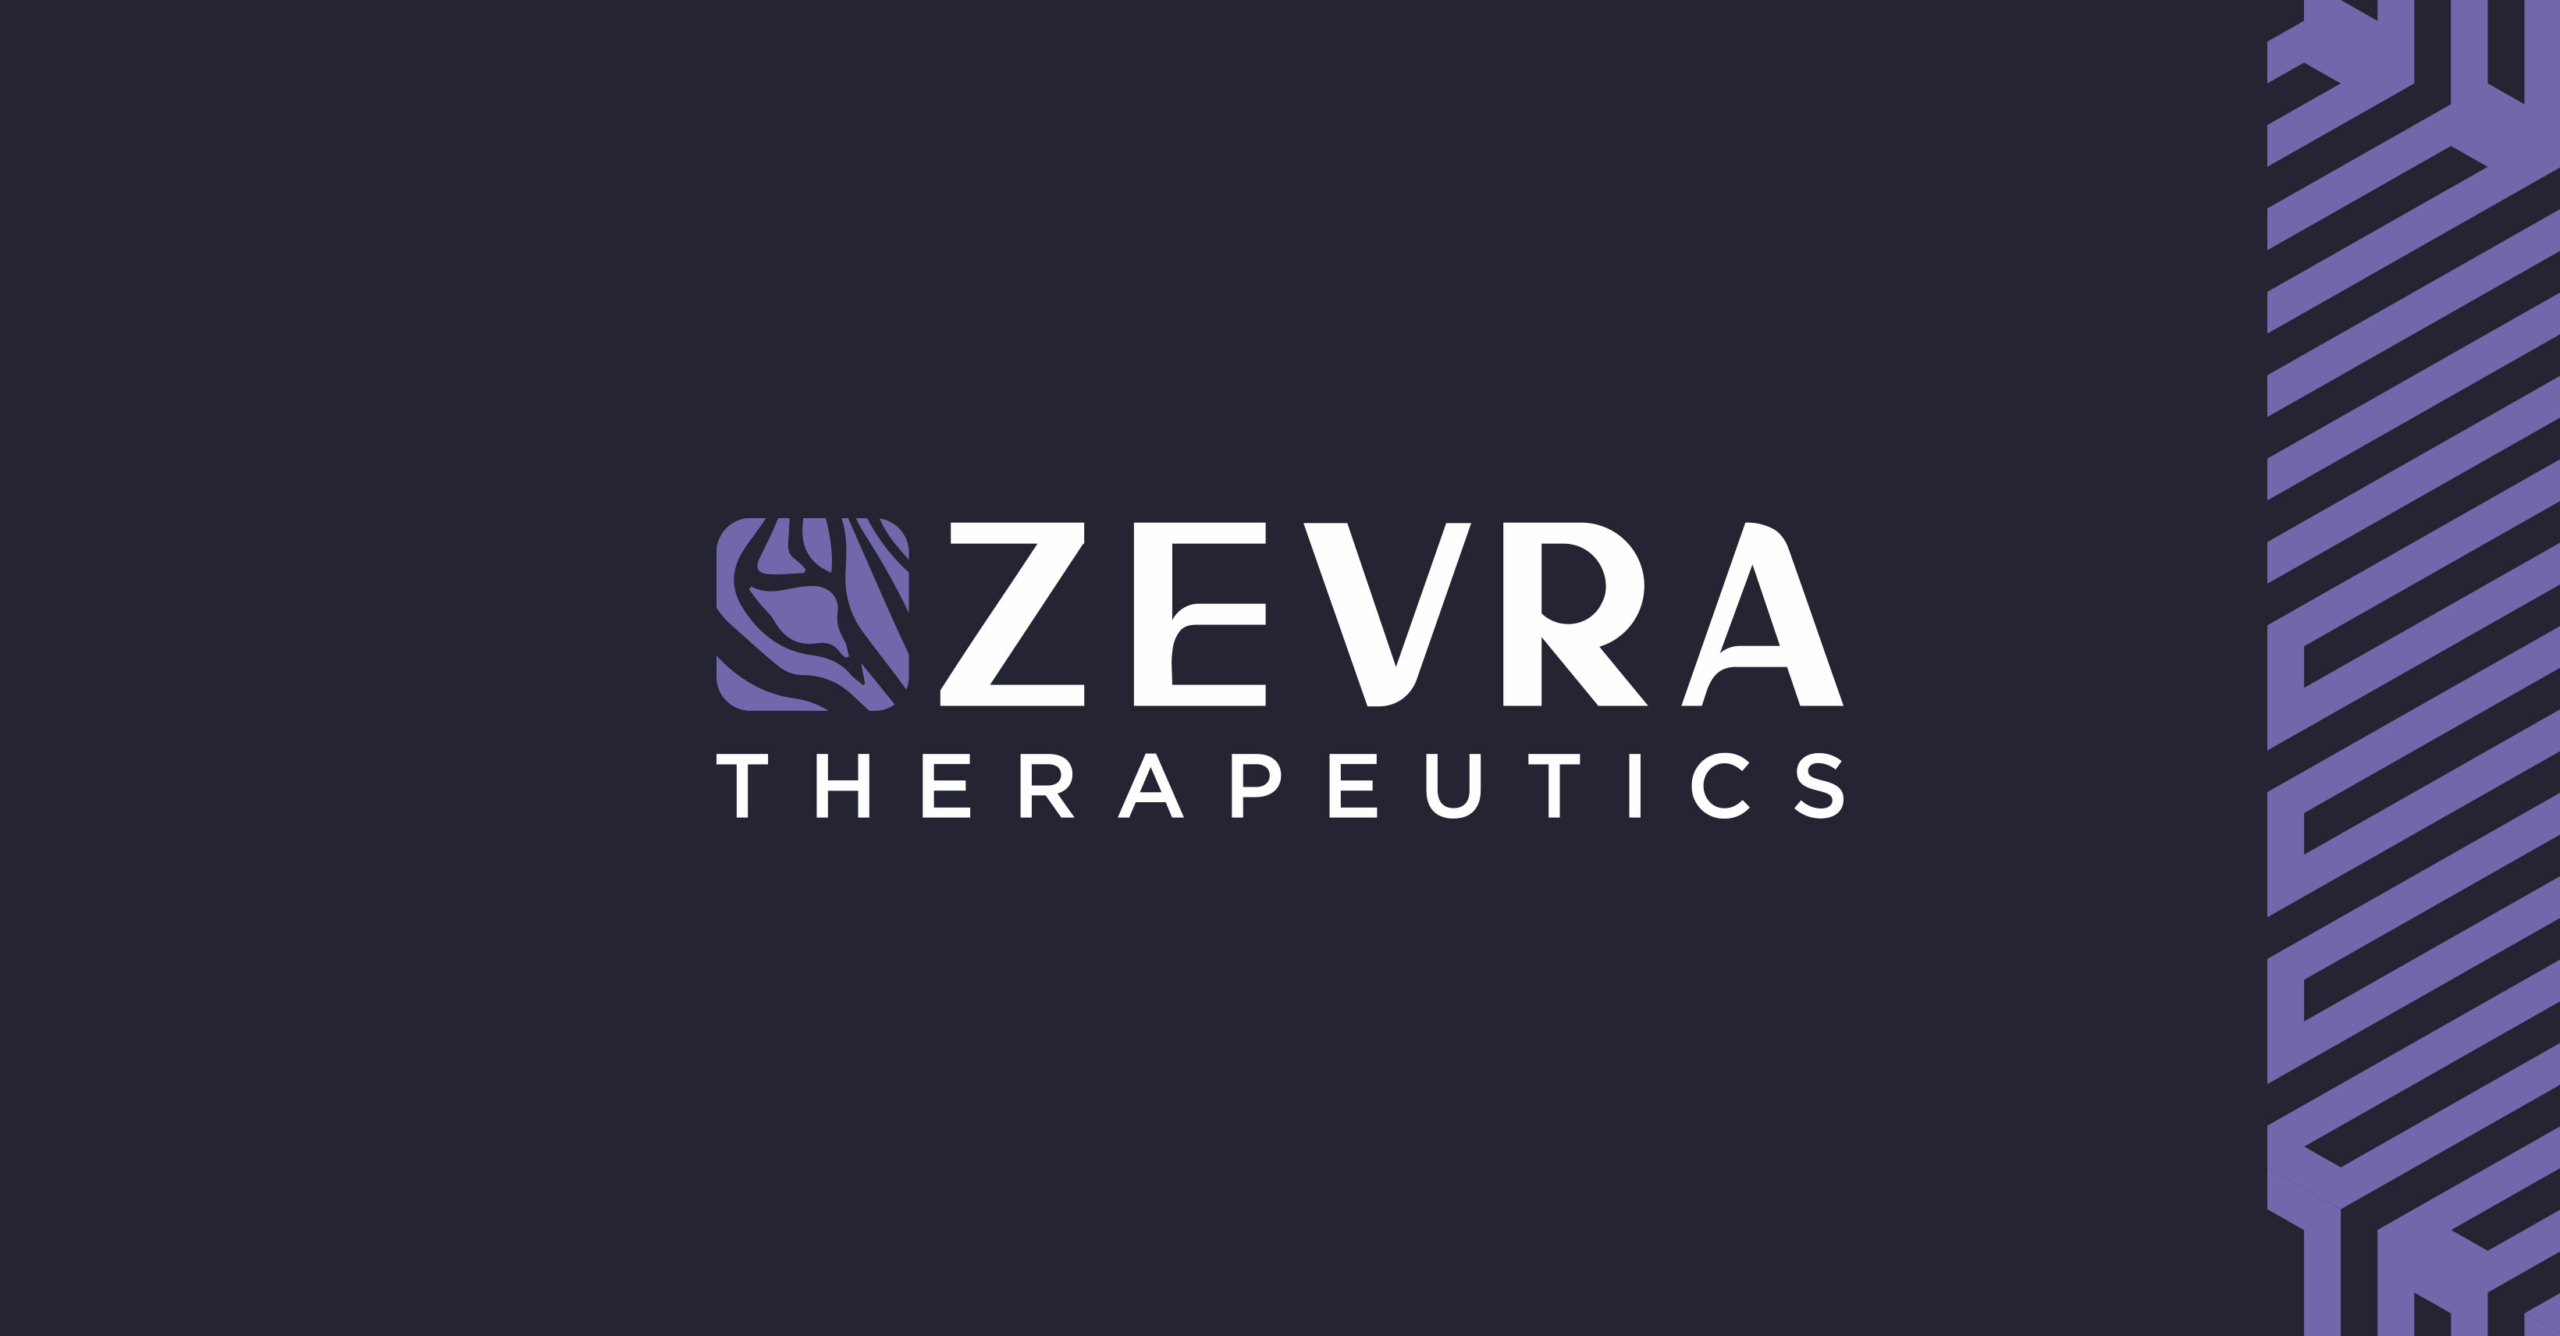 Zevra Therapeutics Reveals Promising Interim Data from Phase 2 Clinical Trial of KP1077 for Idiopathic Hypersomnia